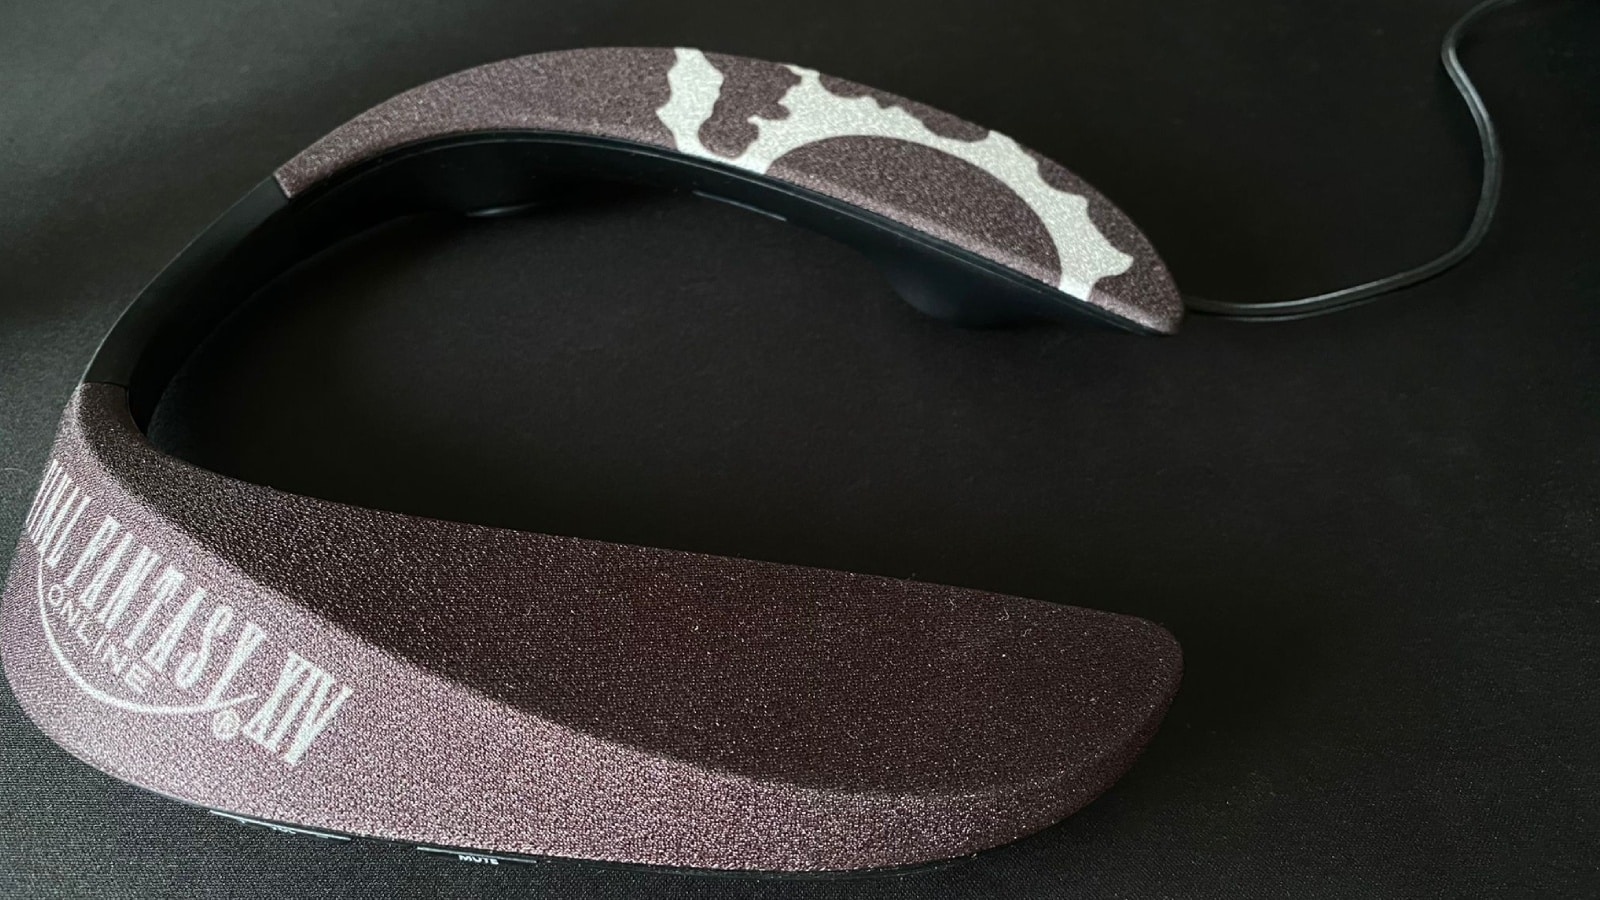 Panasonic Soundslayer SC-GN01 wearable speaker review: Too hot to